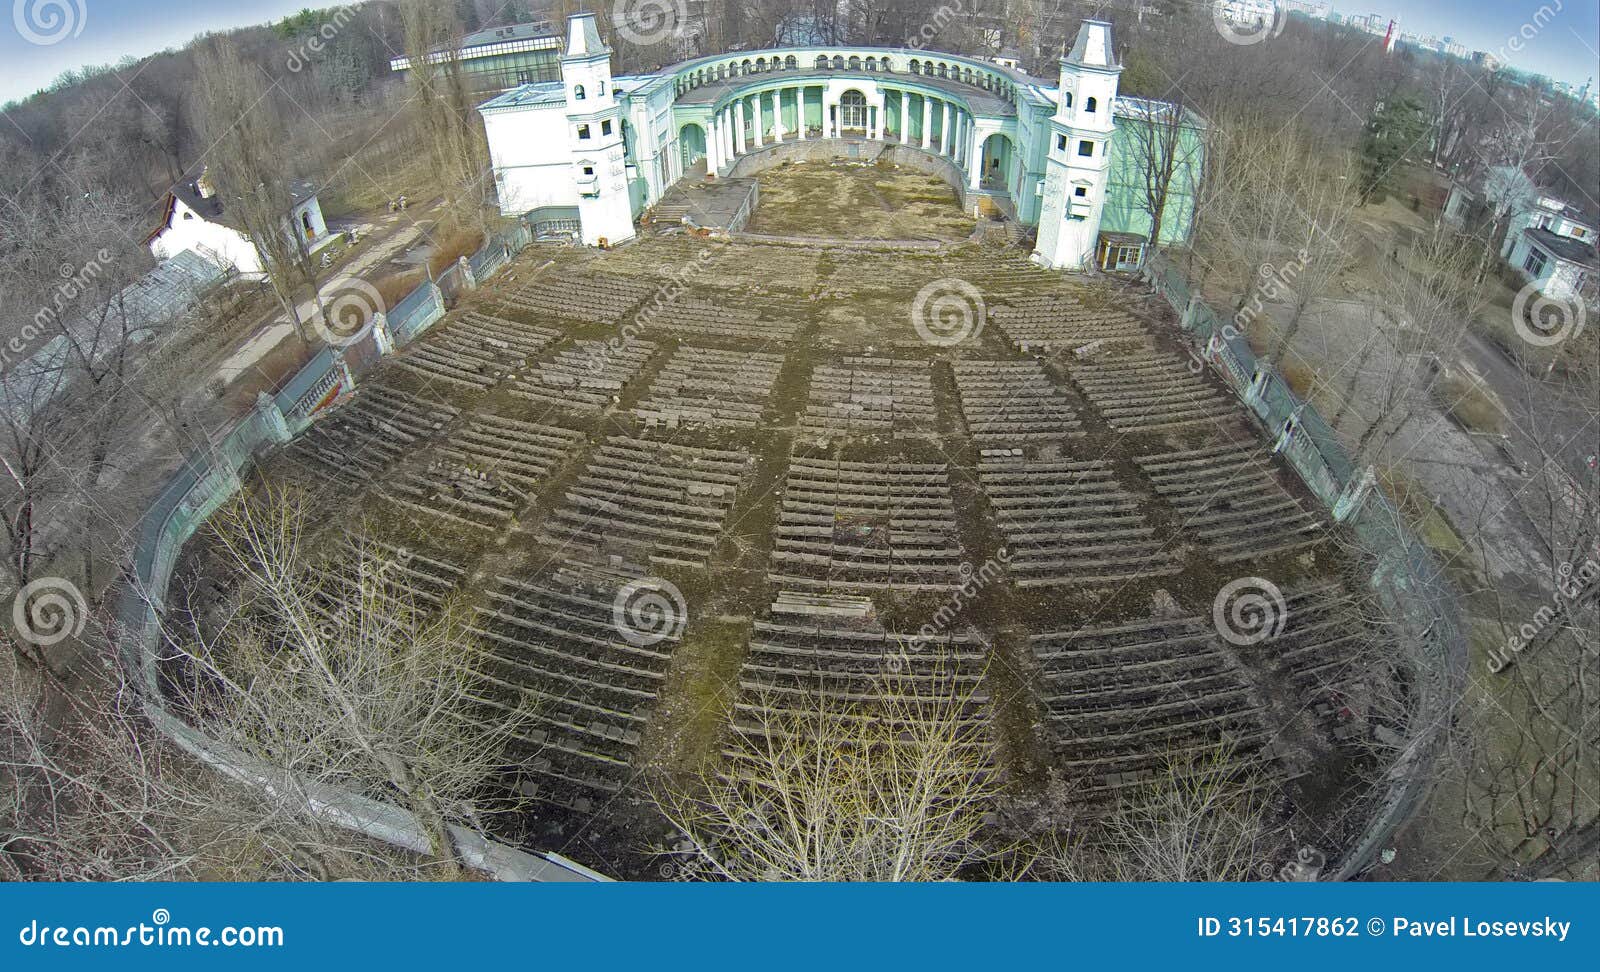 aerial view of the old amphitheater at the